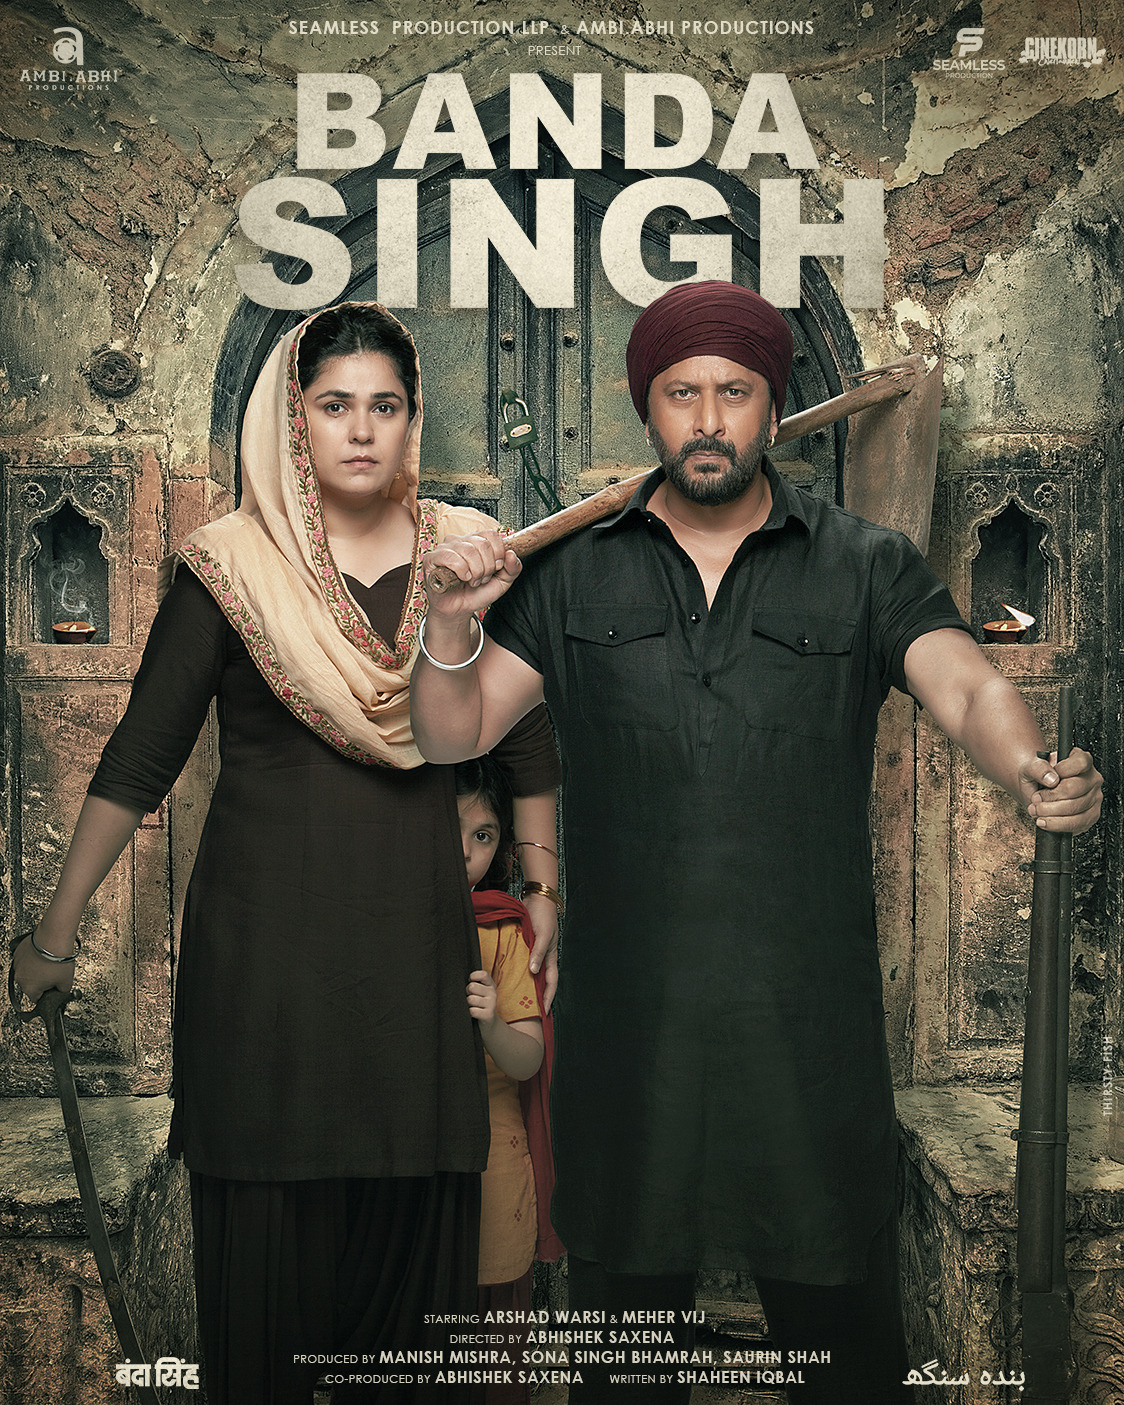 Extra Large Movie Poster Image for Banda Singh 